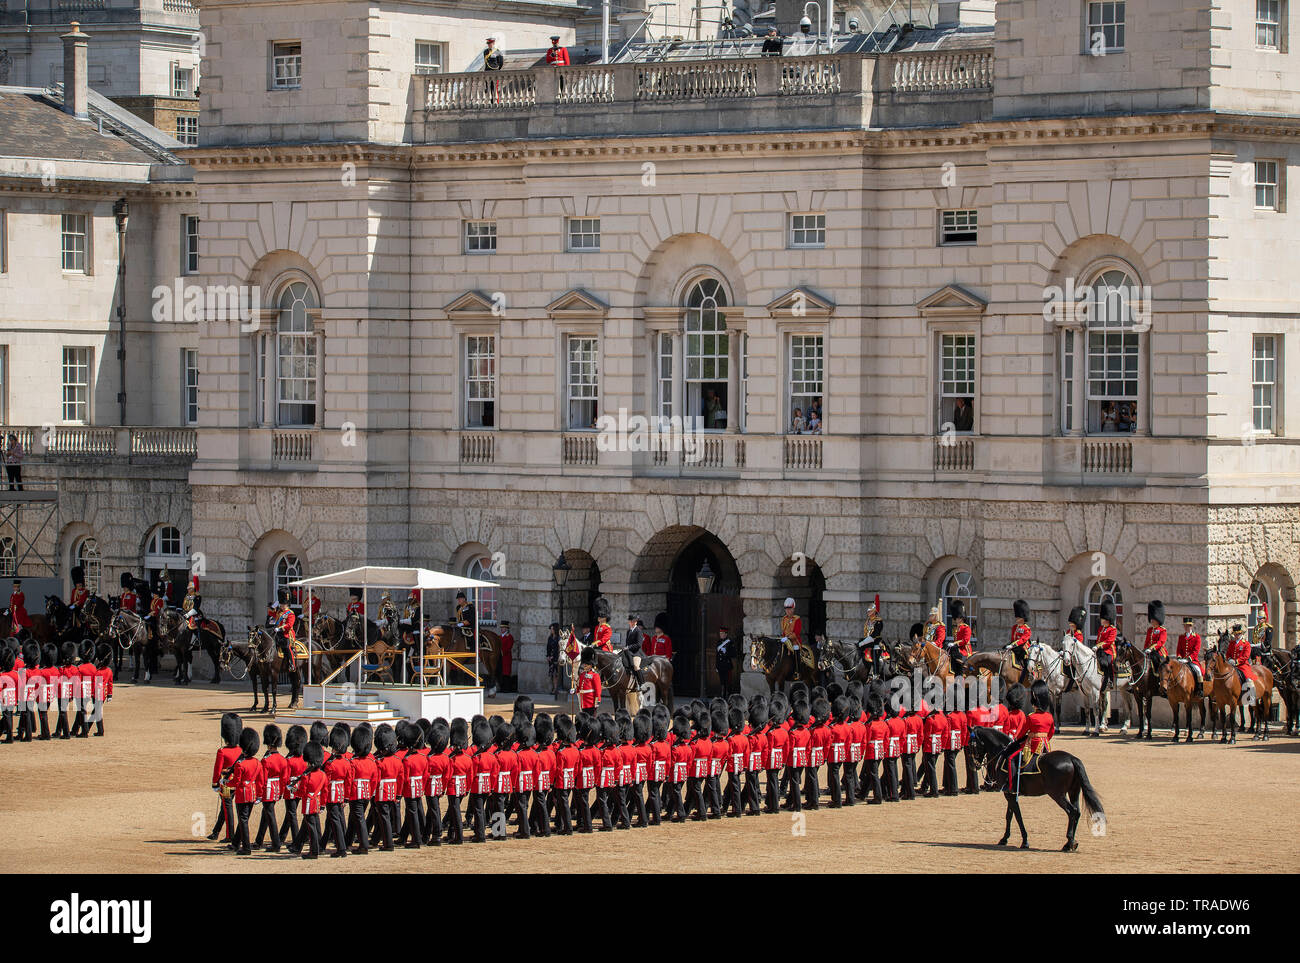 Horse Guards Parade, London, UK. 1st June 2019. Soldiers of the Grenadier Guards parade on Horse Guards for the final formal Review before Trooping the Colour on 8th June 2019 and are inspected by HRH The Duke of York. Credit: Malcolm Park/Alamy Live News. Stock Photo